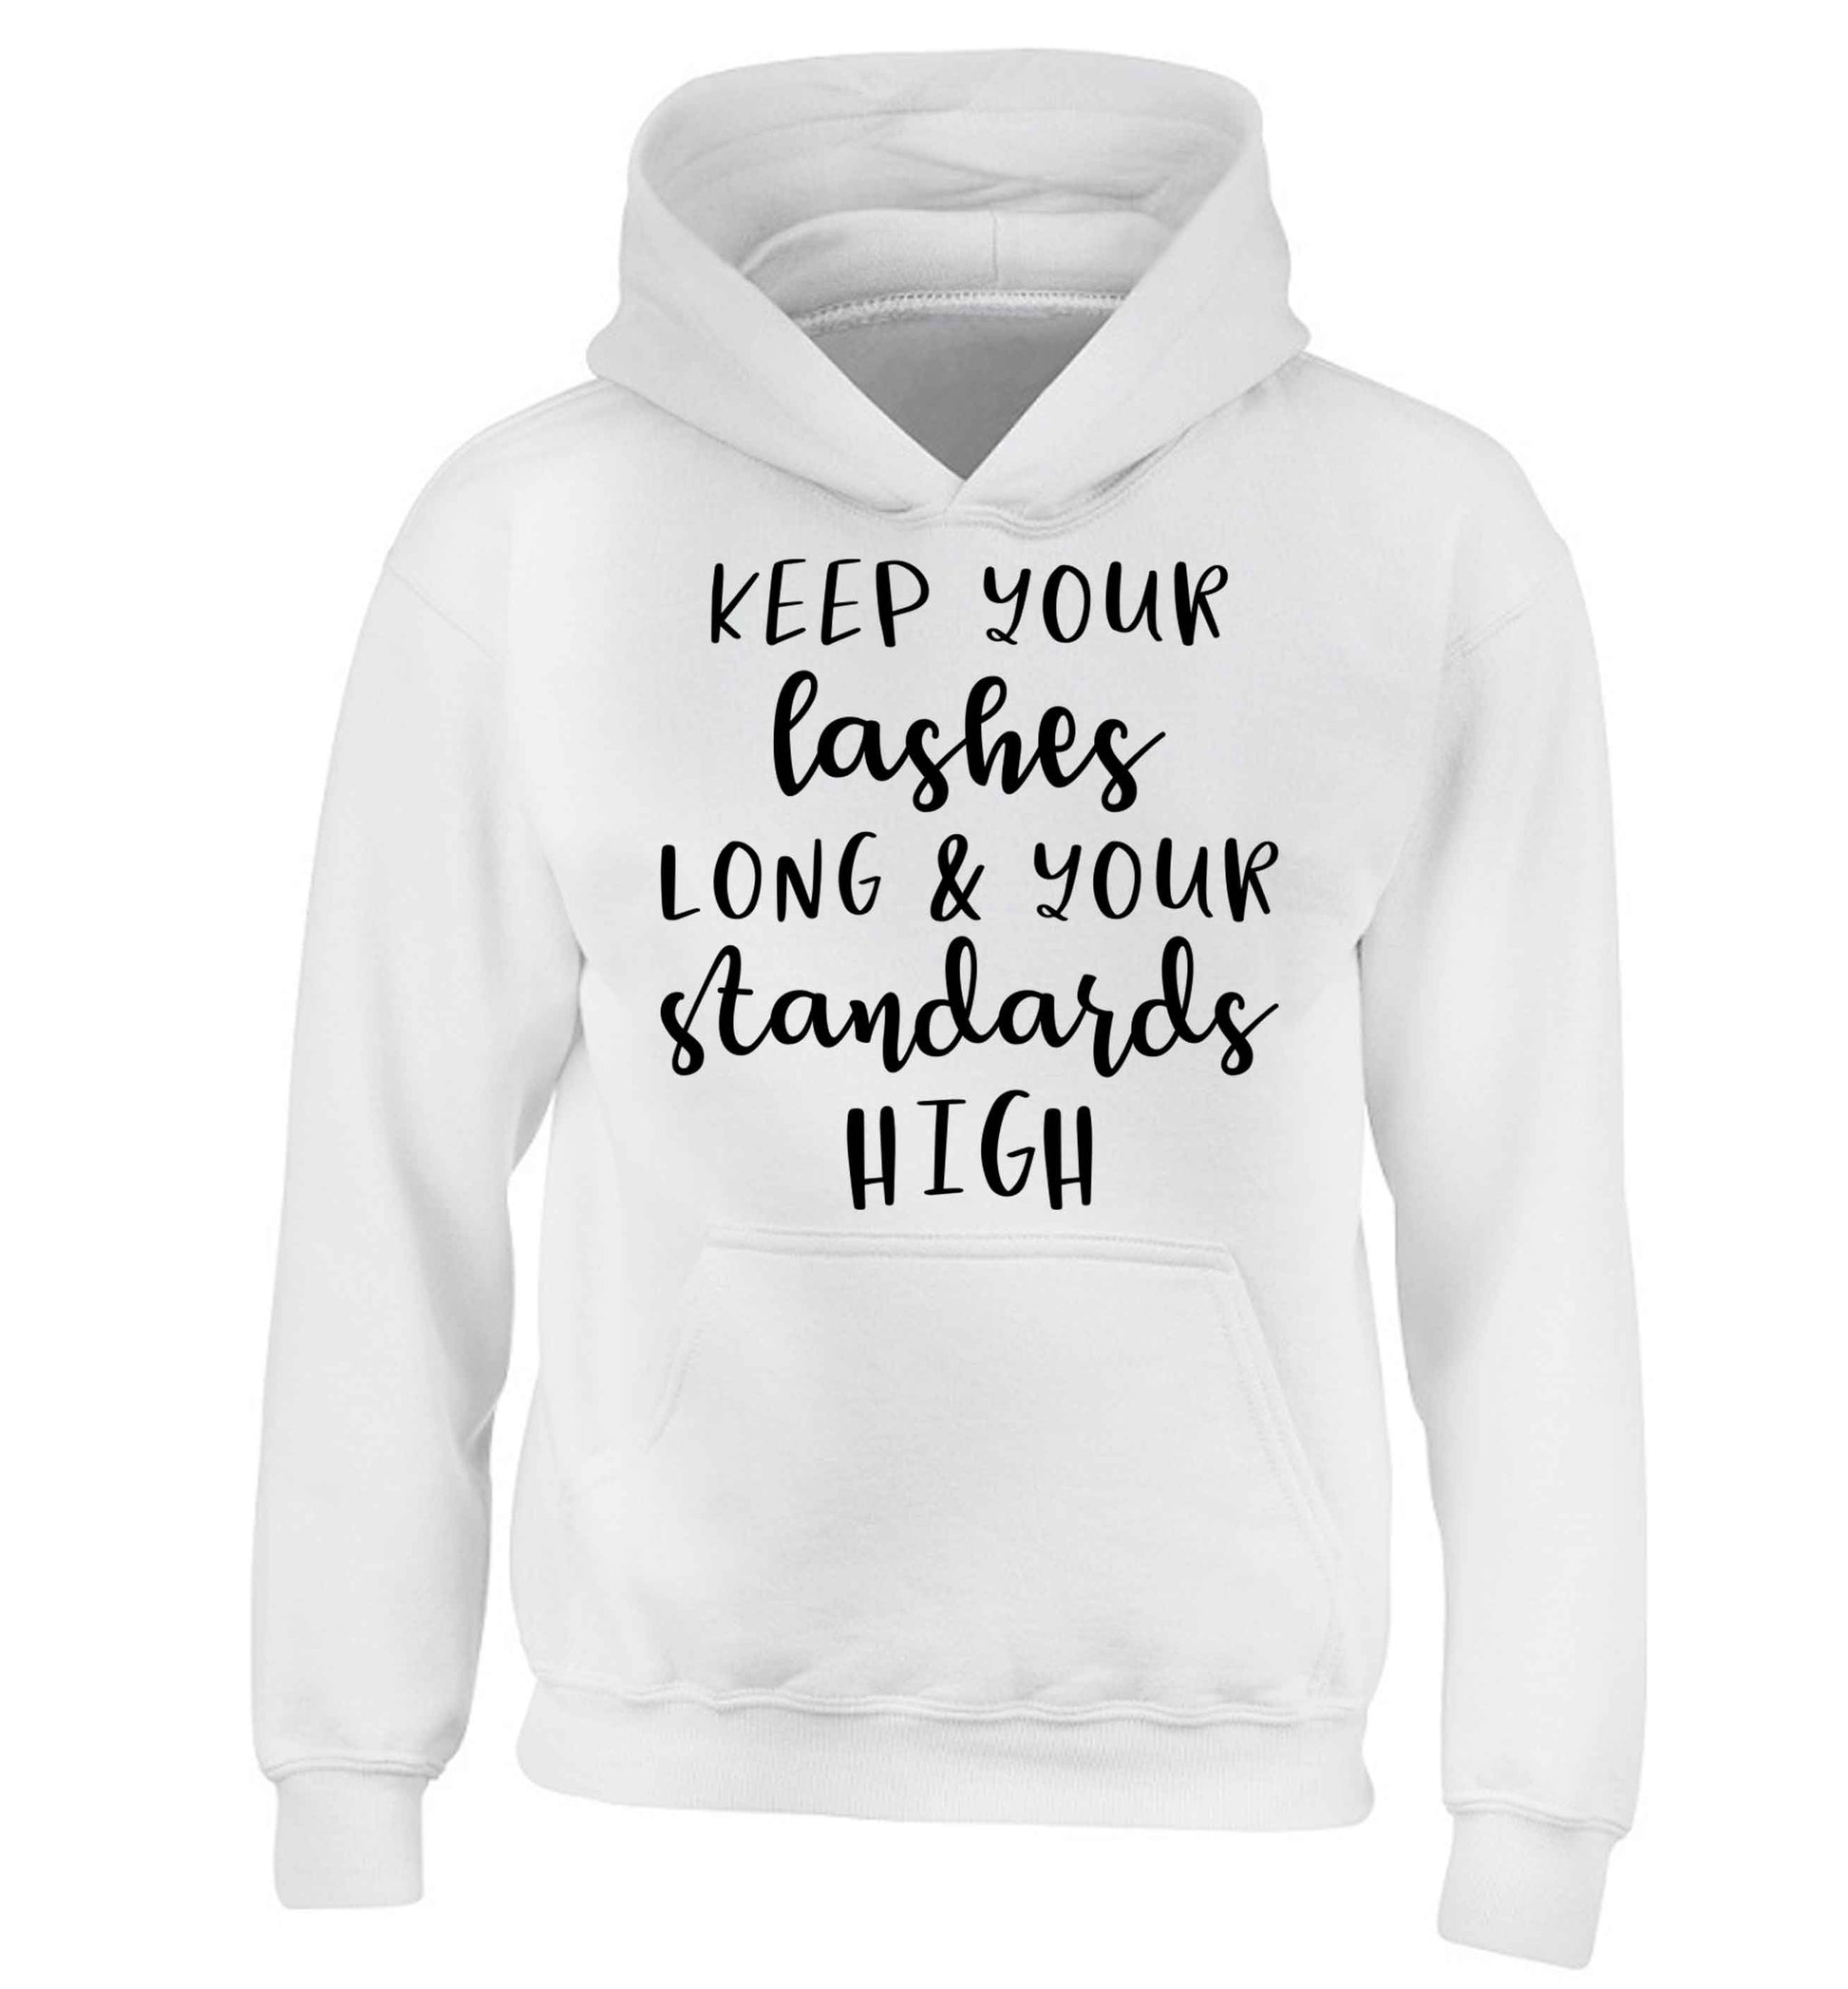 Keep your lashes long and your standards high children's white hoodie 12-13 Years